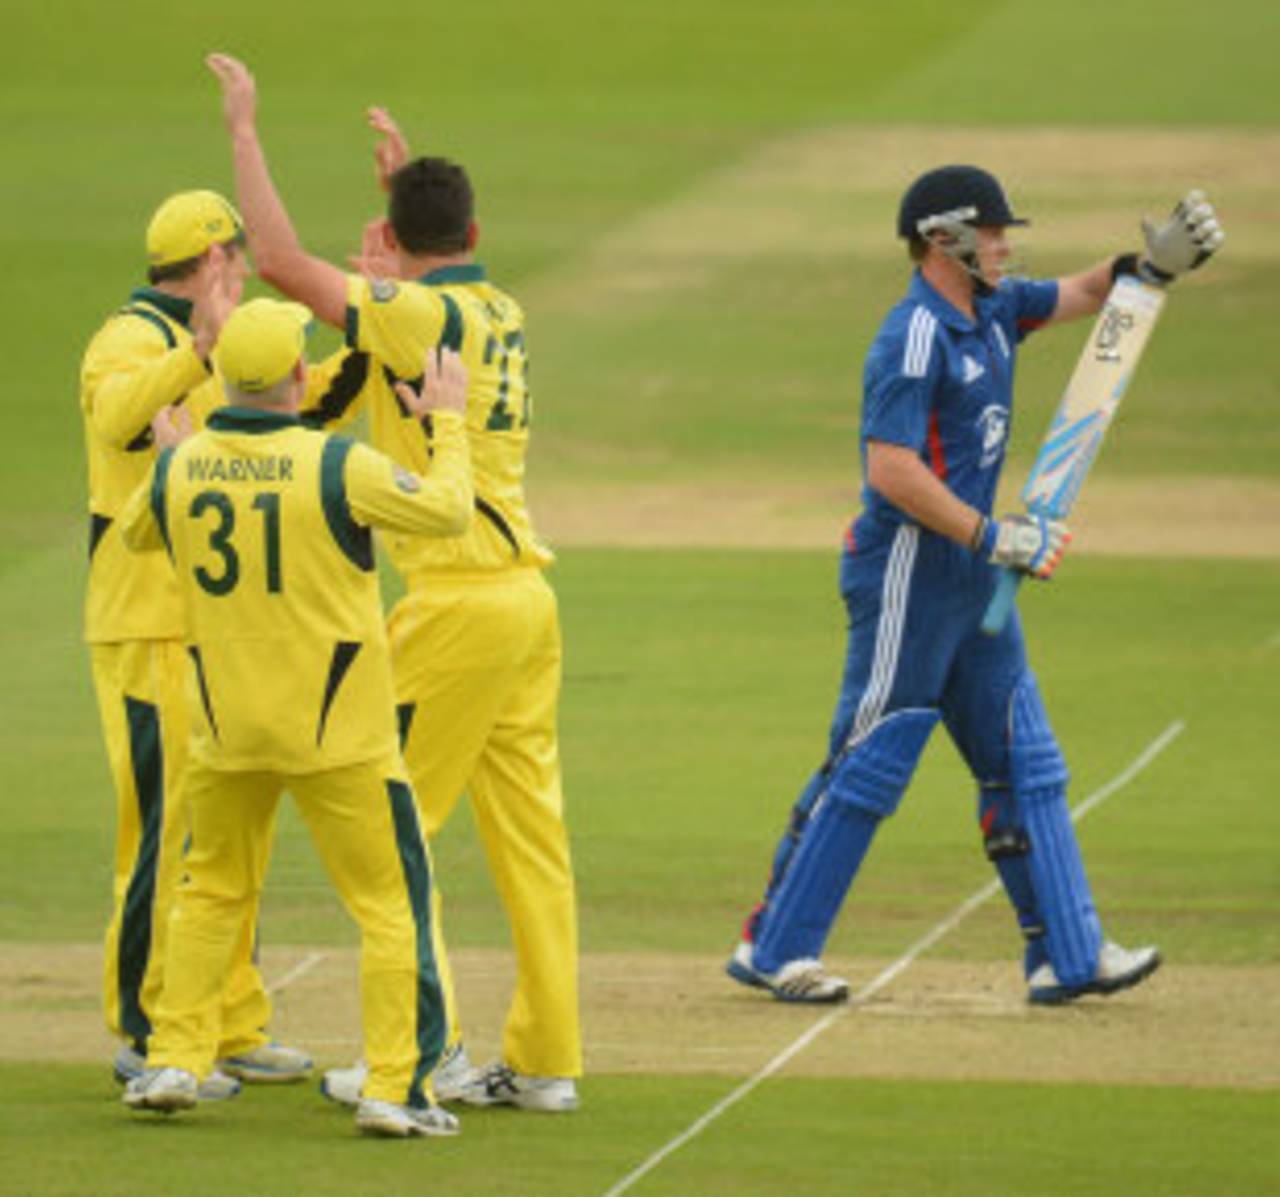 Ian Bell reviews the decision after being given out caught behind, England v Australia, 1st ODI, Lord's, June 29, 2012